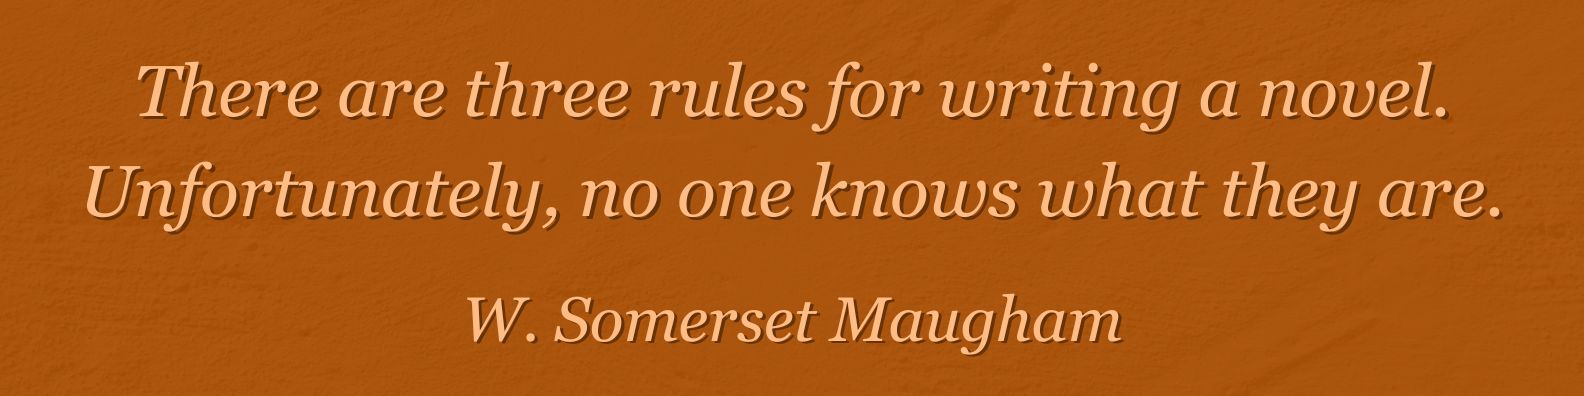 The Writer Speaks - quote: There are three rules for writing a novel. Unfortunately, no one knows what they are. W. Somerset Maugham